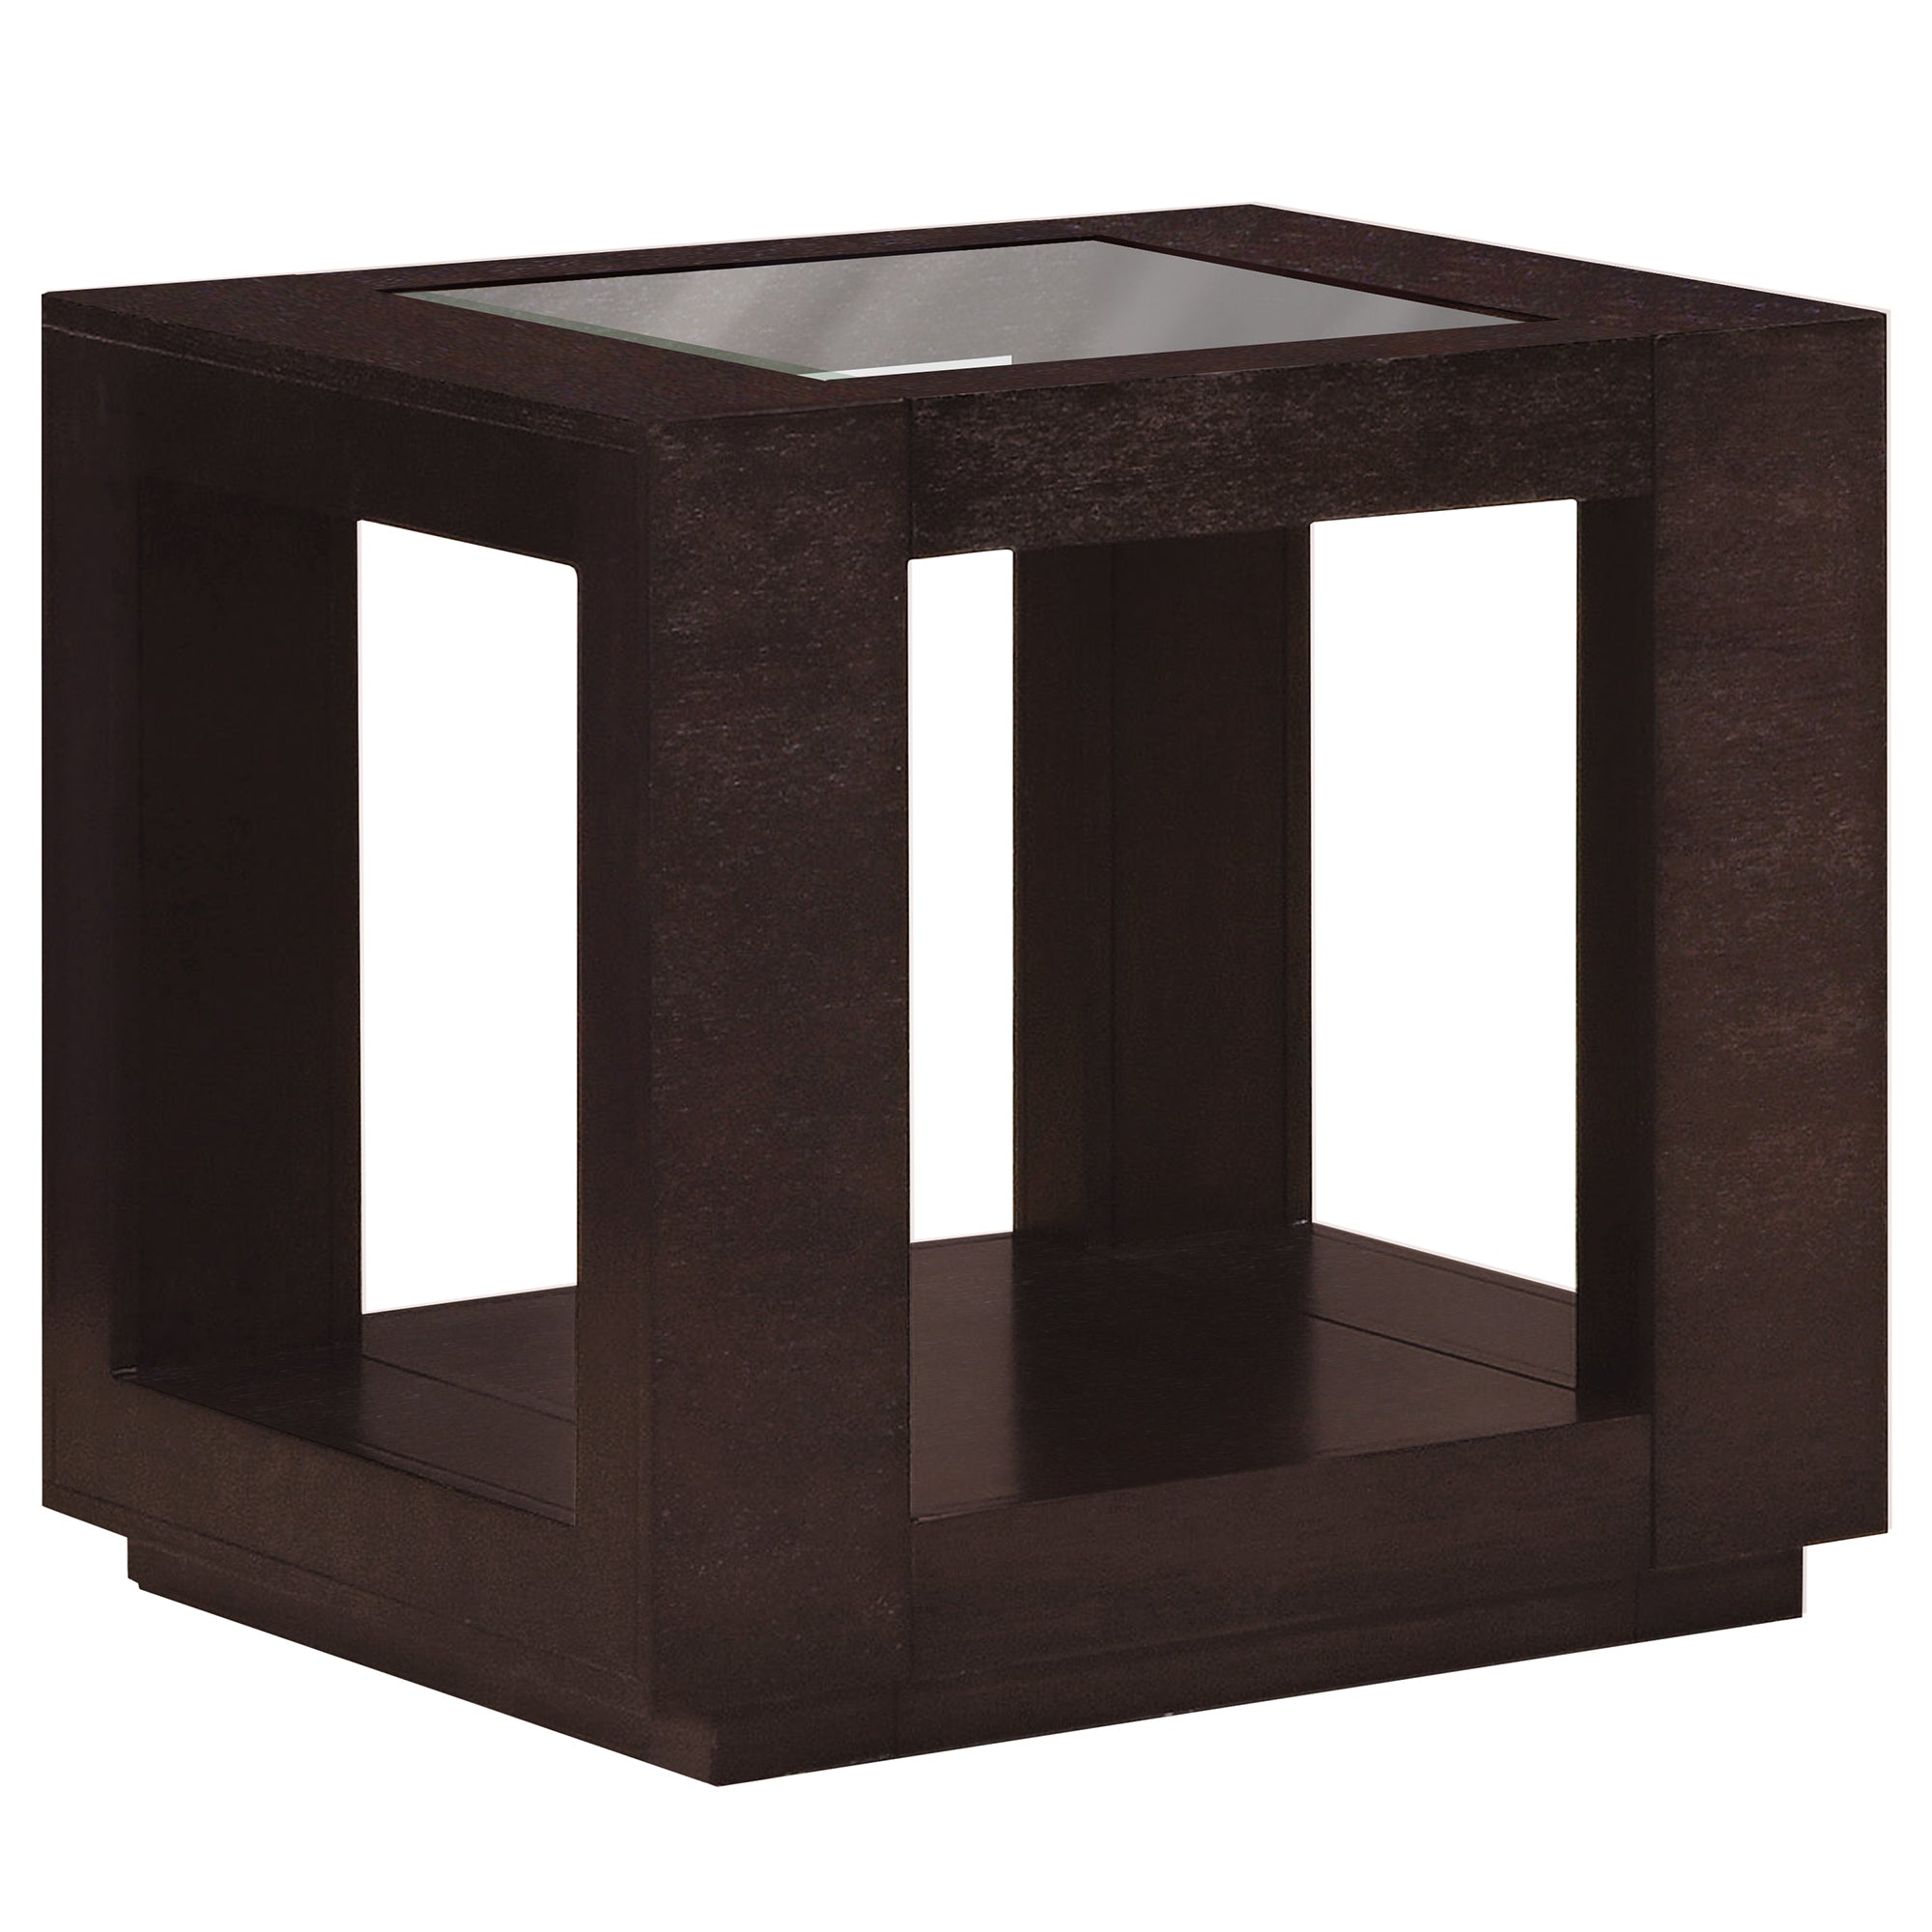 Accent Table - Espresso Veneer With Glass Insert